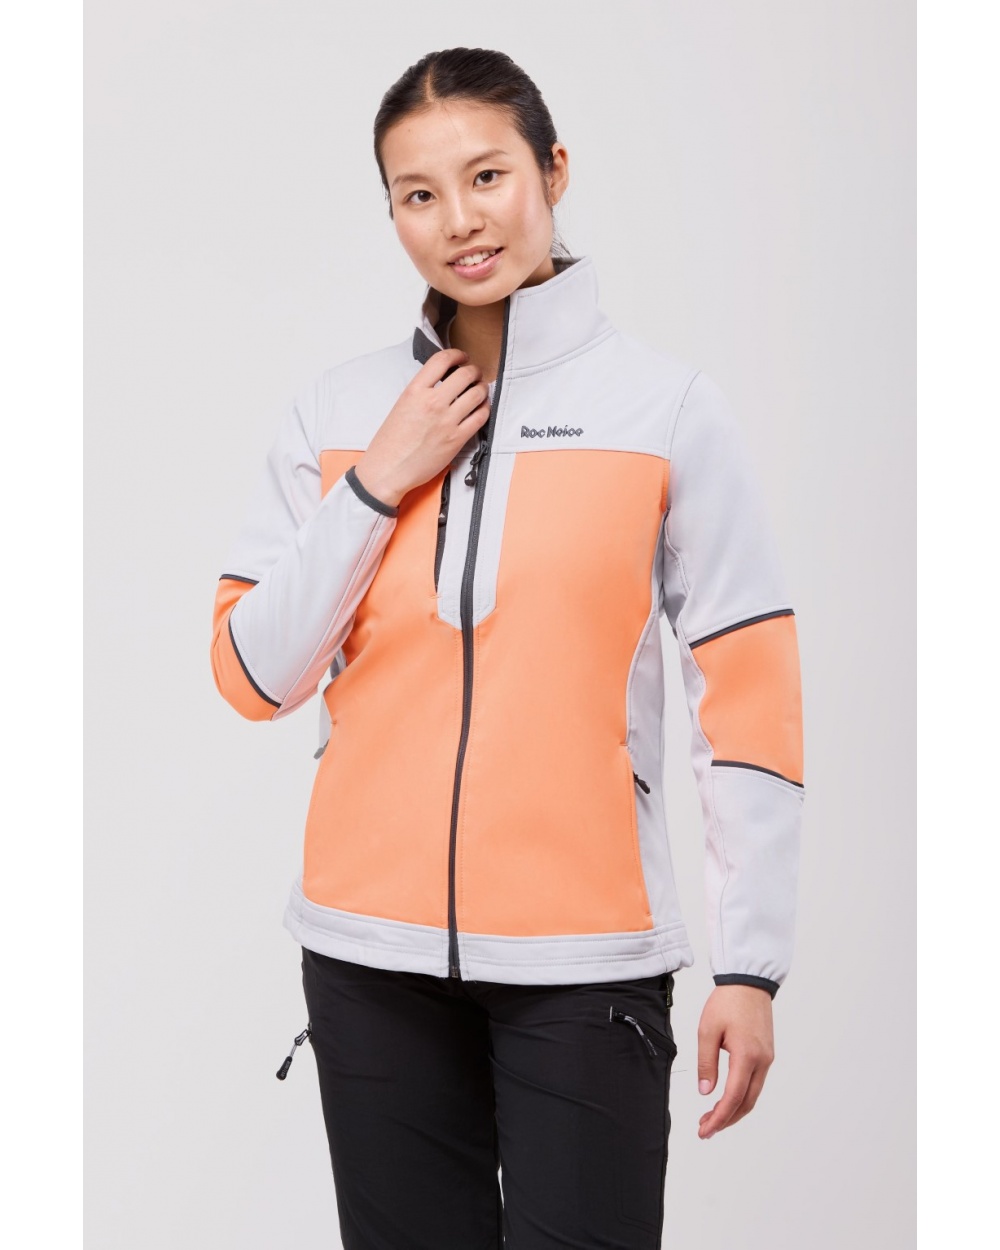 Roc Neige softshell para chica RN1010001 color gris claro + coral